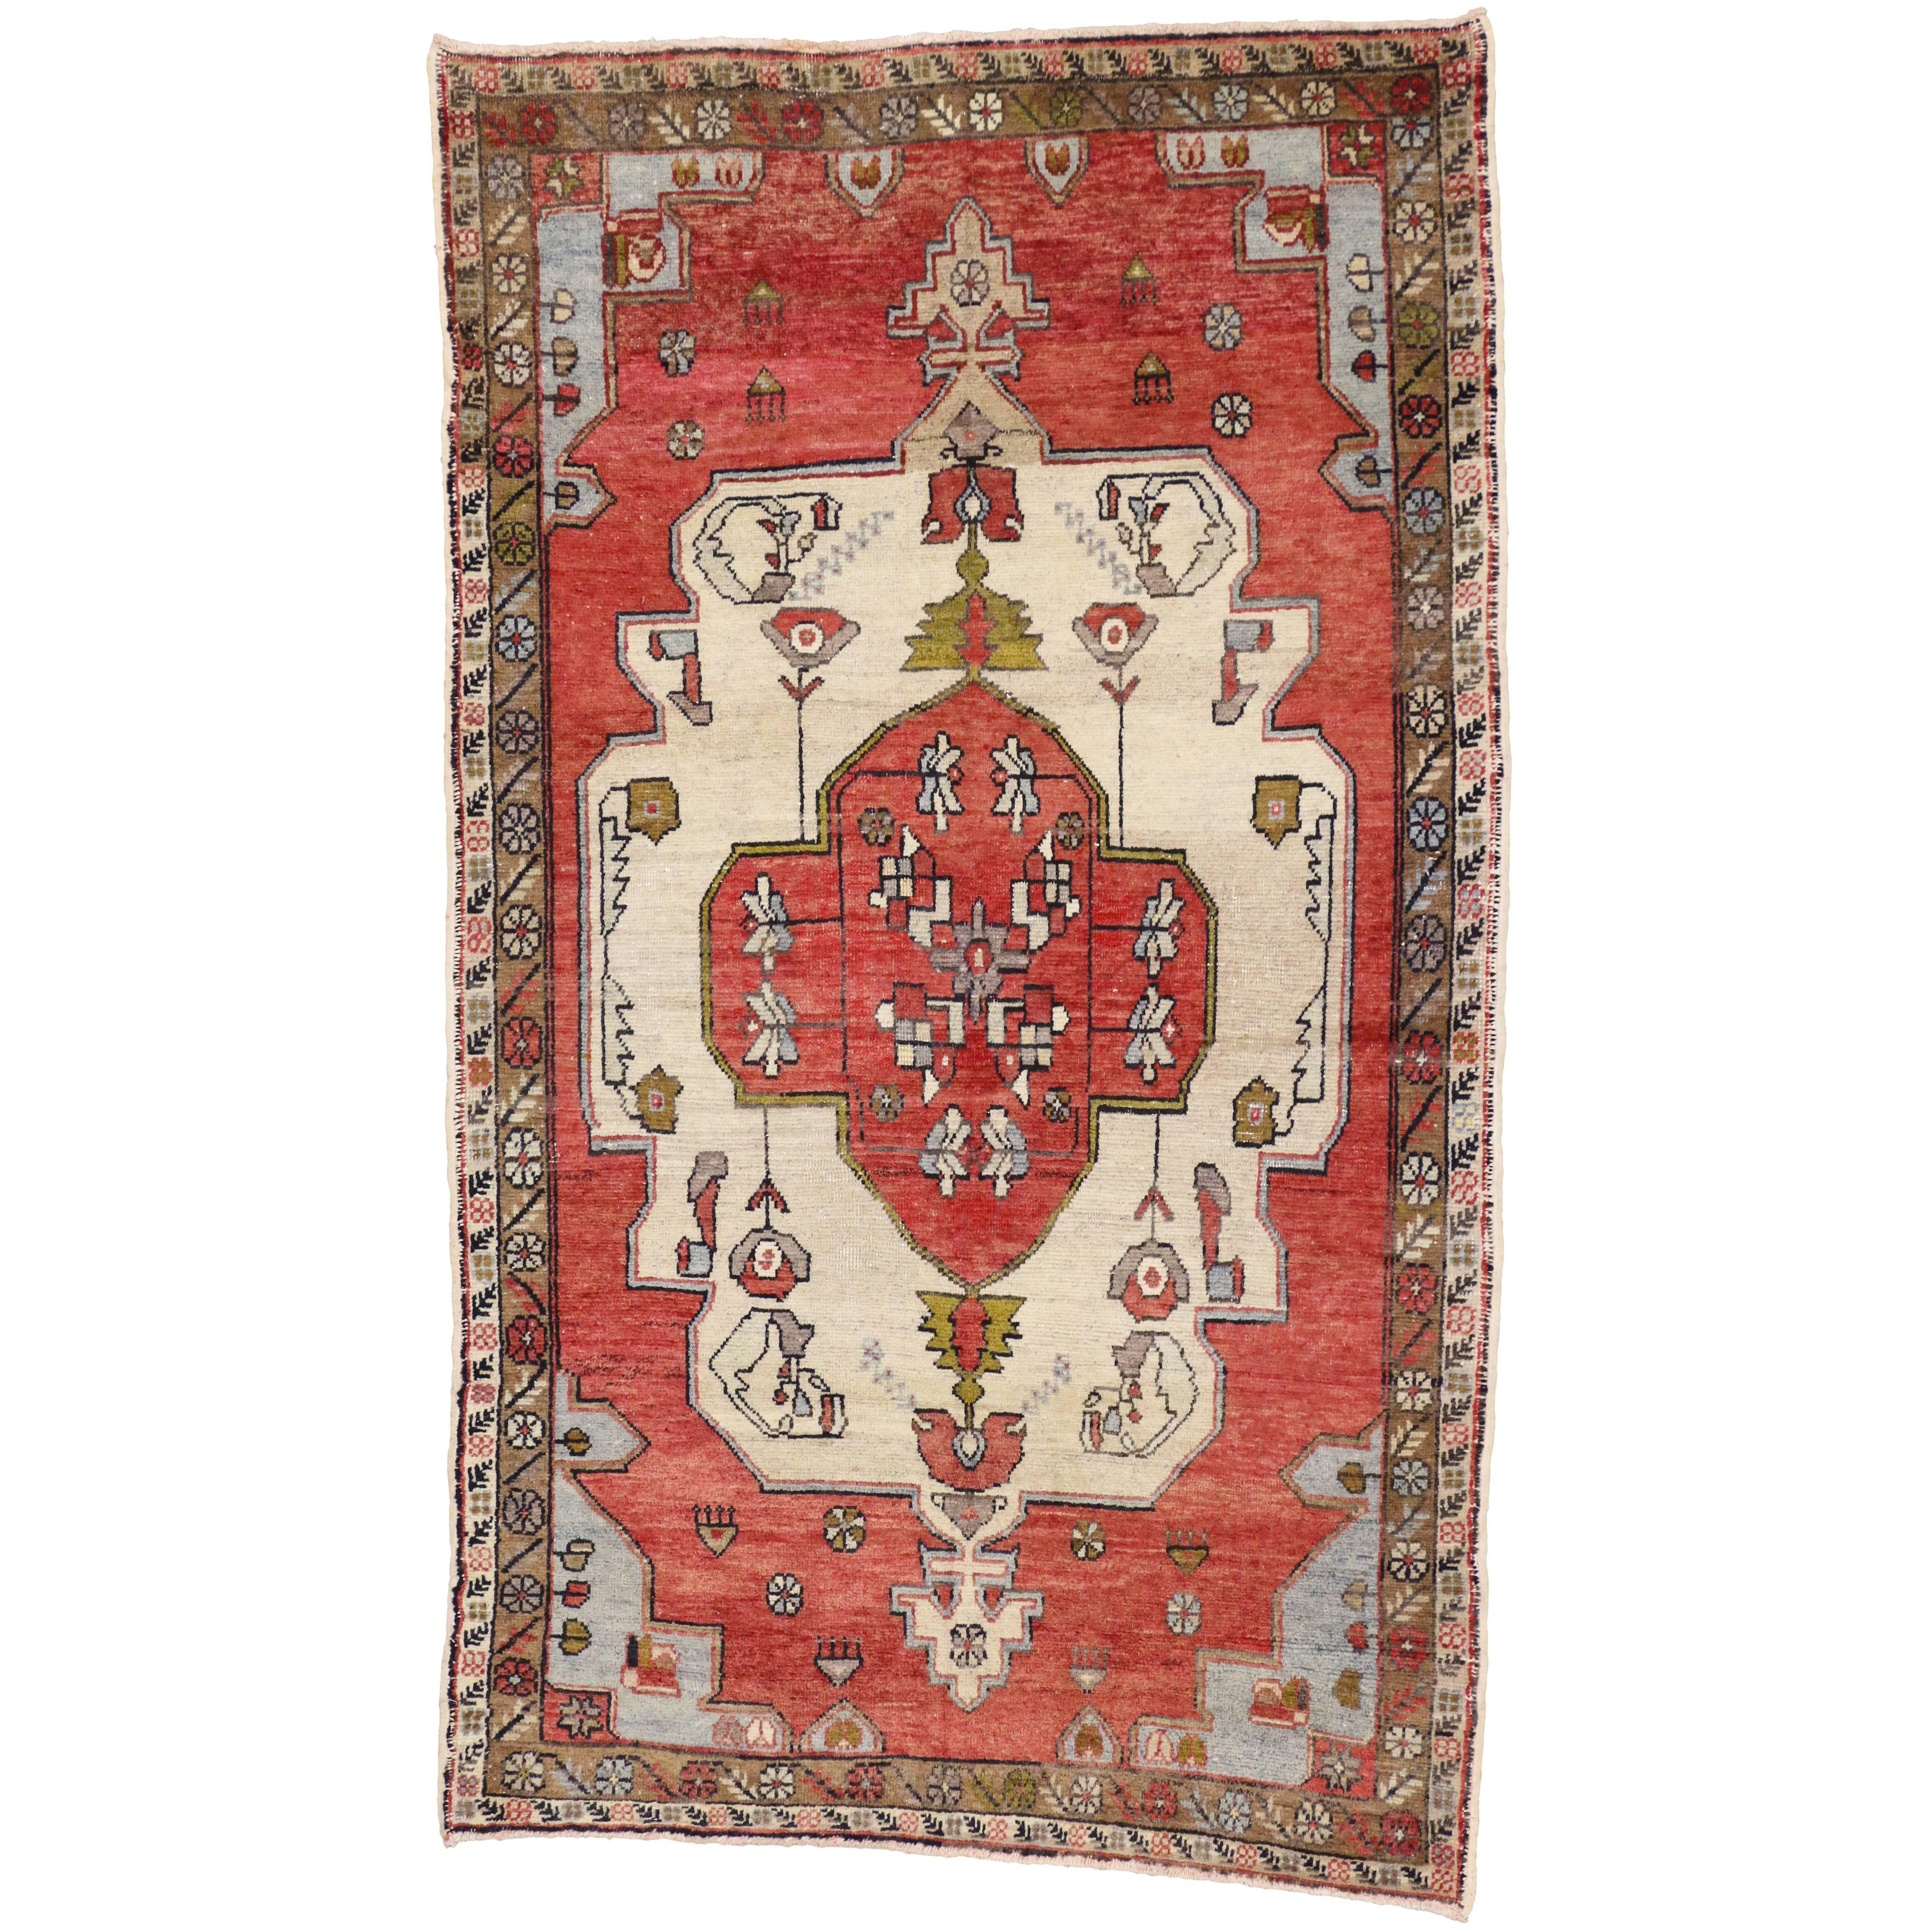 Vintage Turkish Oushak Gallery Rug with Modern Traditional Style